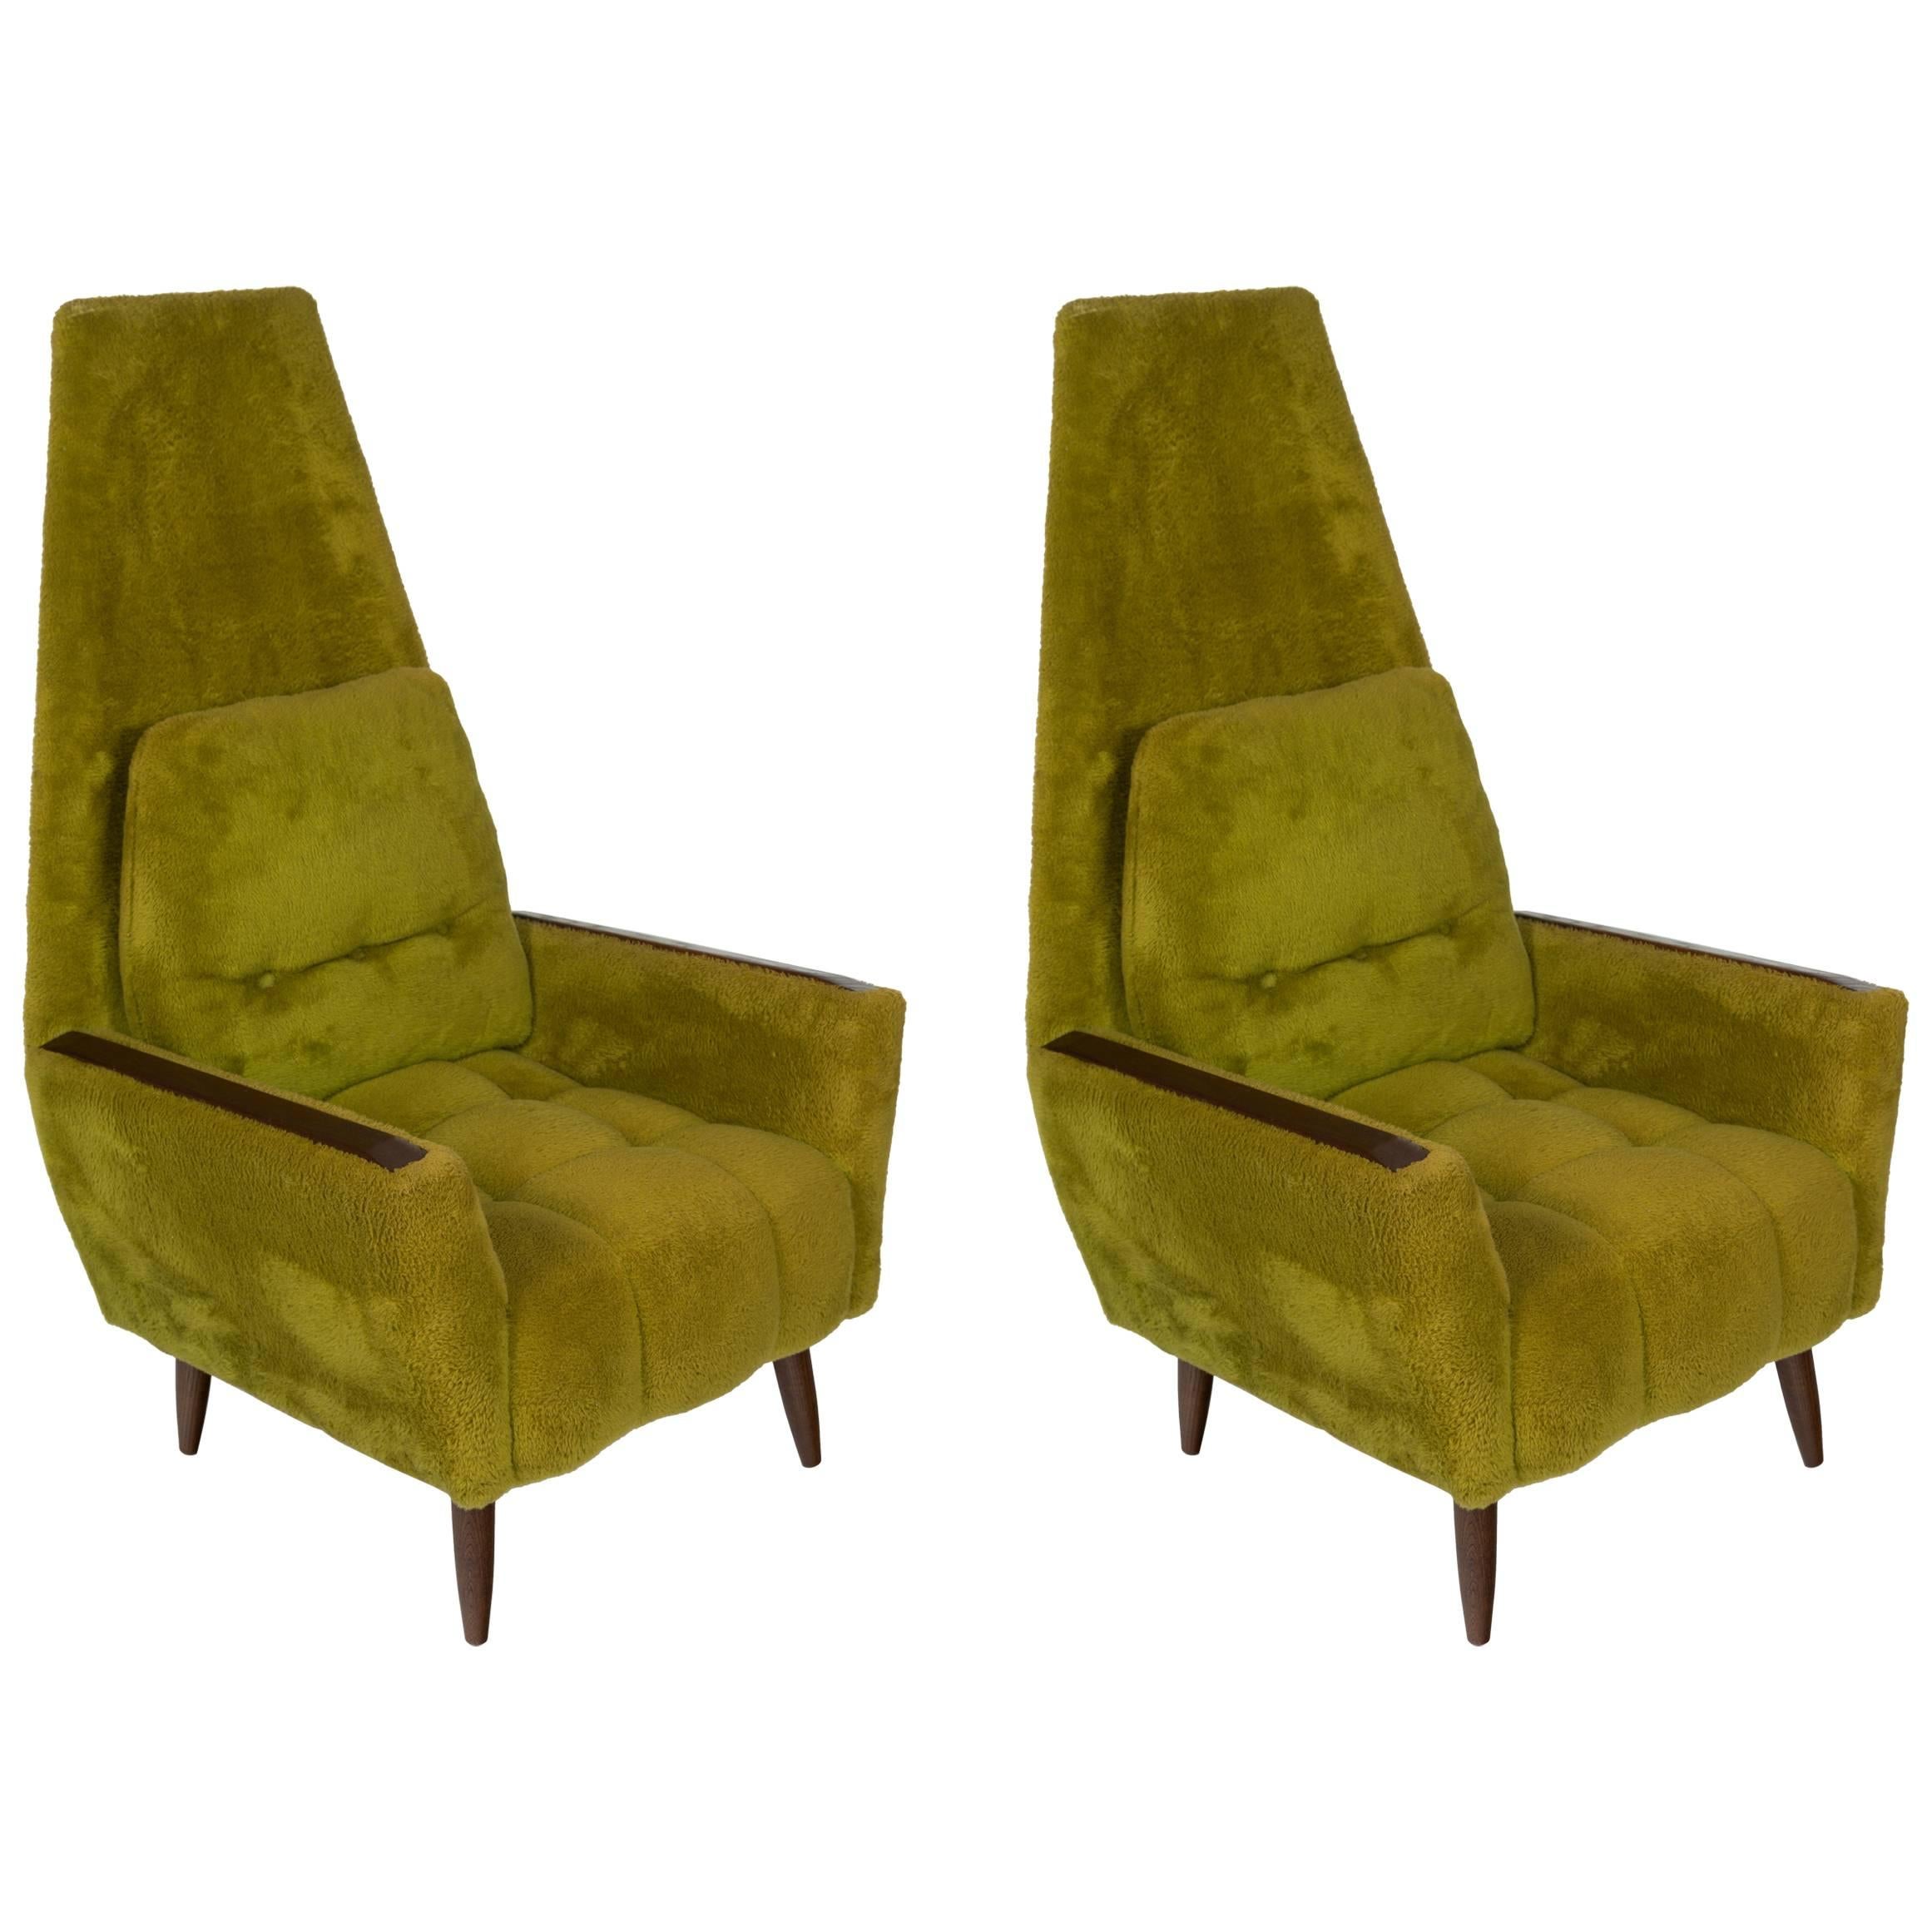 Pair of 1950s High Back Lounge Chairs